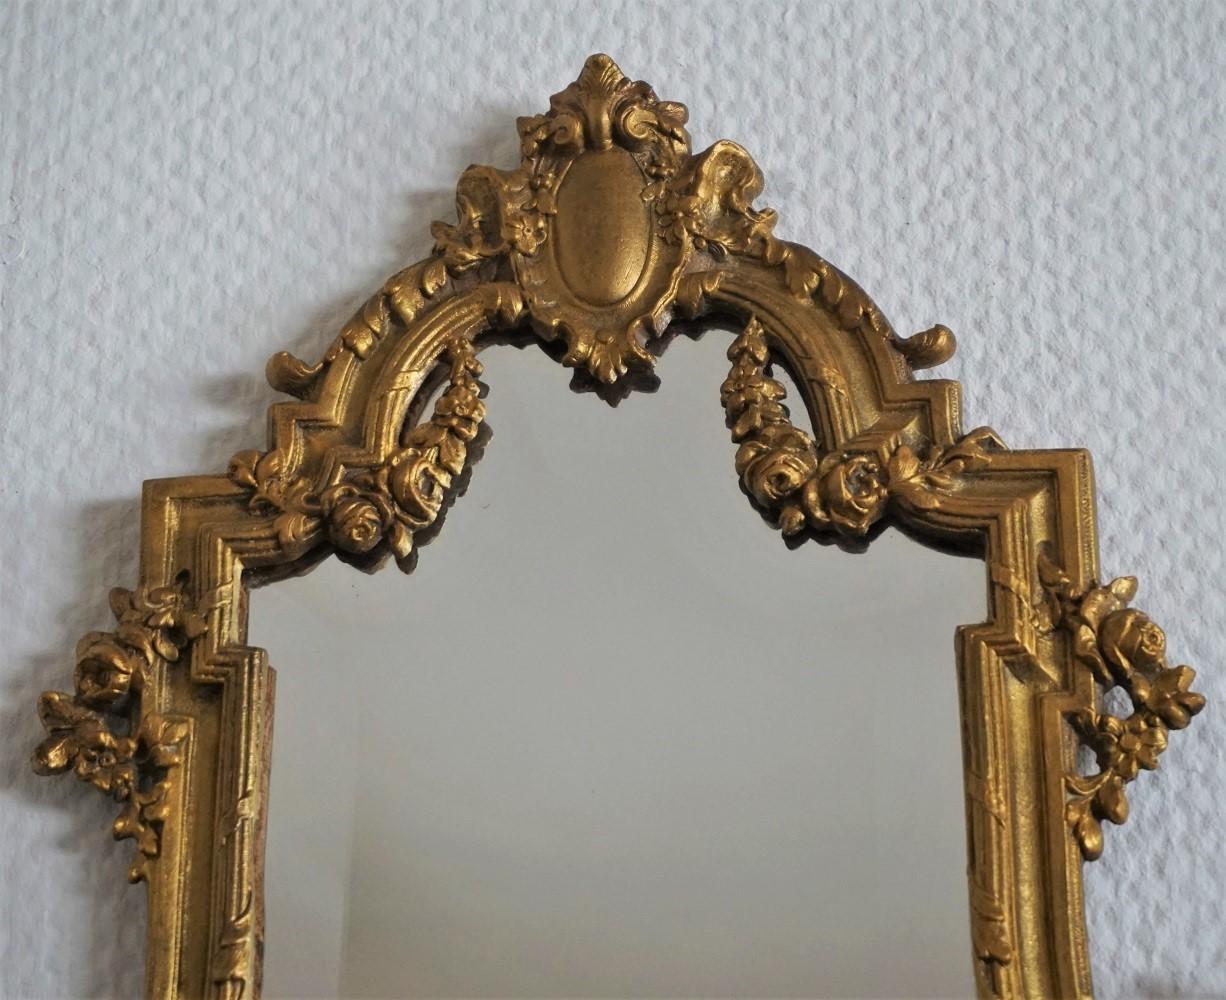 A lovery Louis XV style faceted crystal glass mirror with an elaborate solid gilt bronze frame richly ornate with foliage, garlands and torches, France, mid-19th century.
Measures:
Height 19 in (48.5 cm)
Width 15 in (38 cm).
 